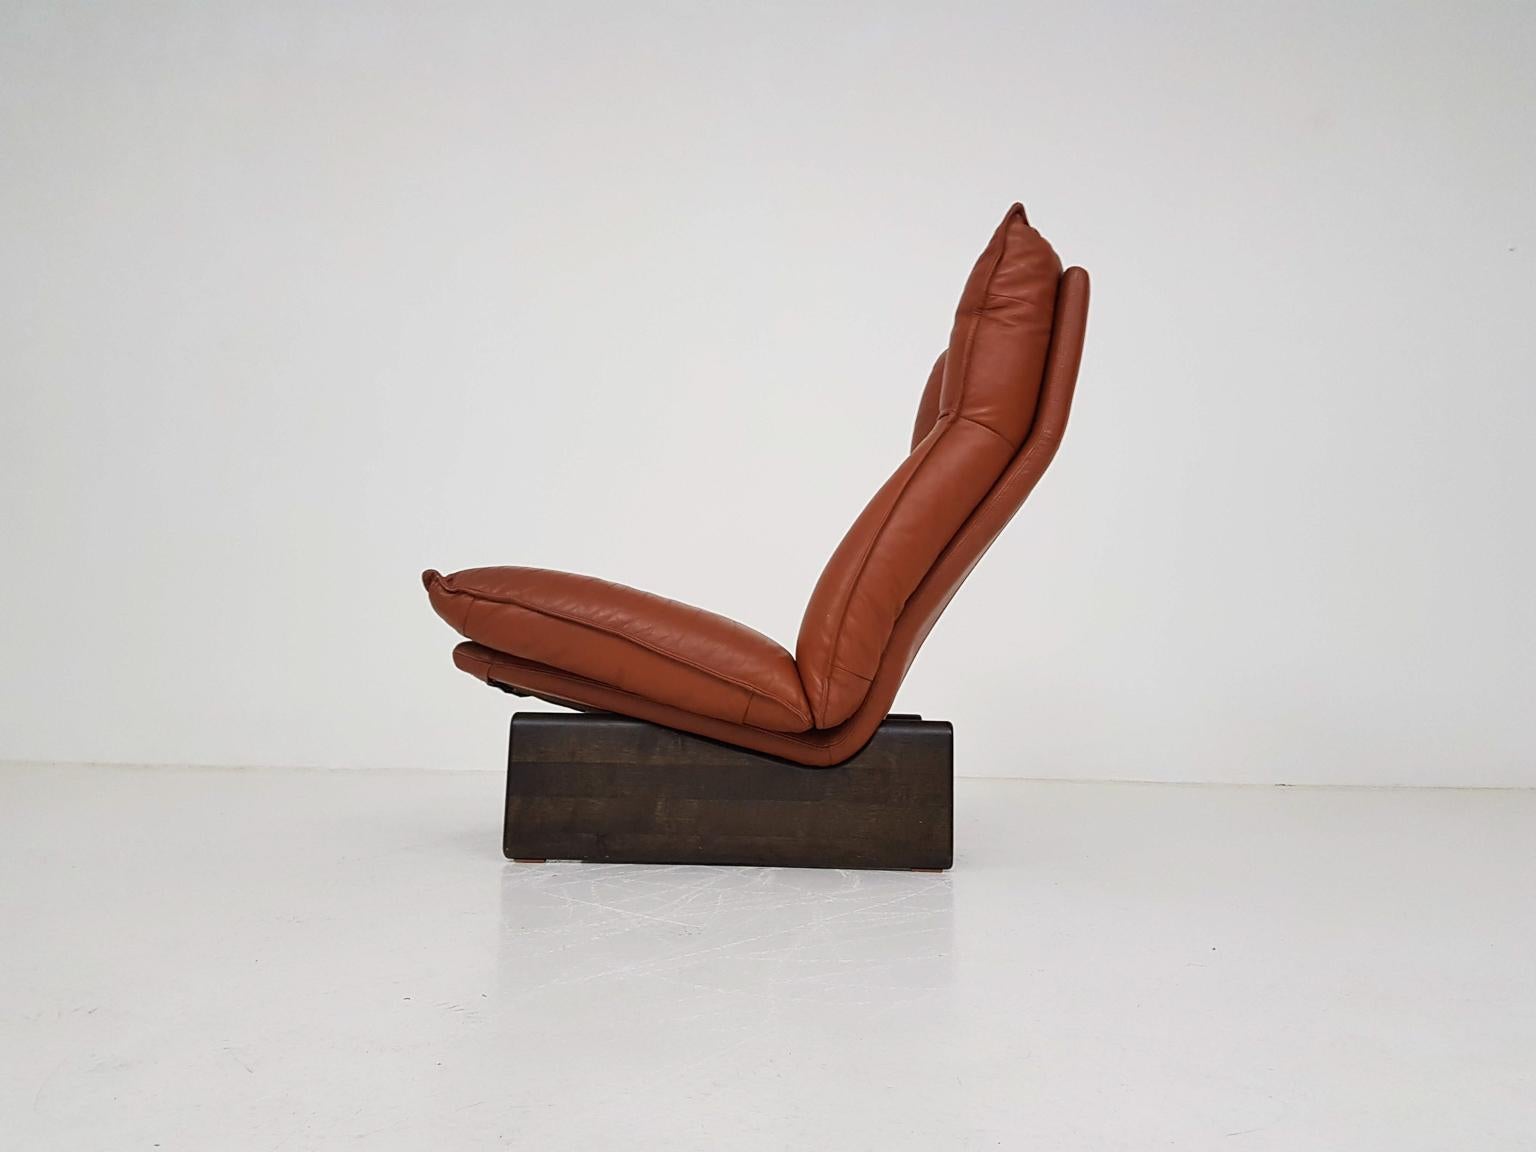 Leather and Wood Lounge Chair by Leolux, Dutch Modern Design, 1970s 1